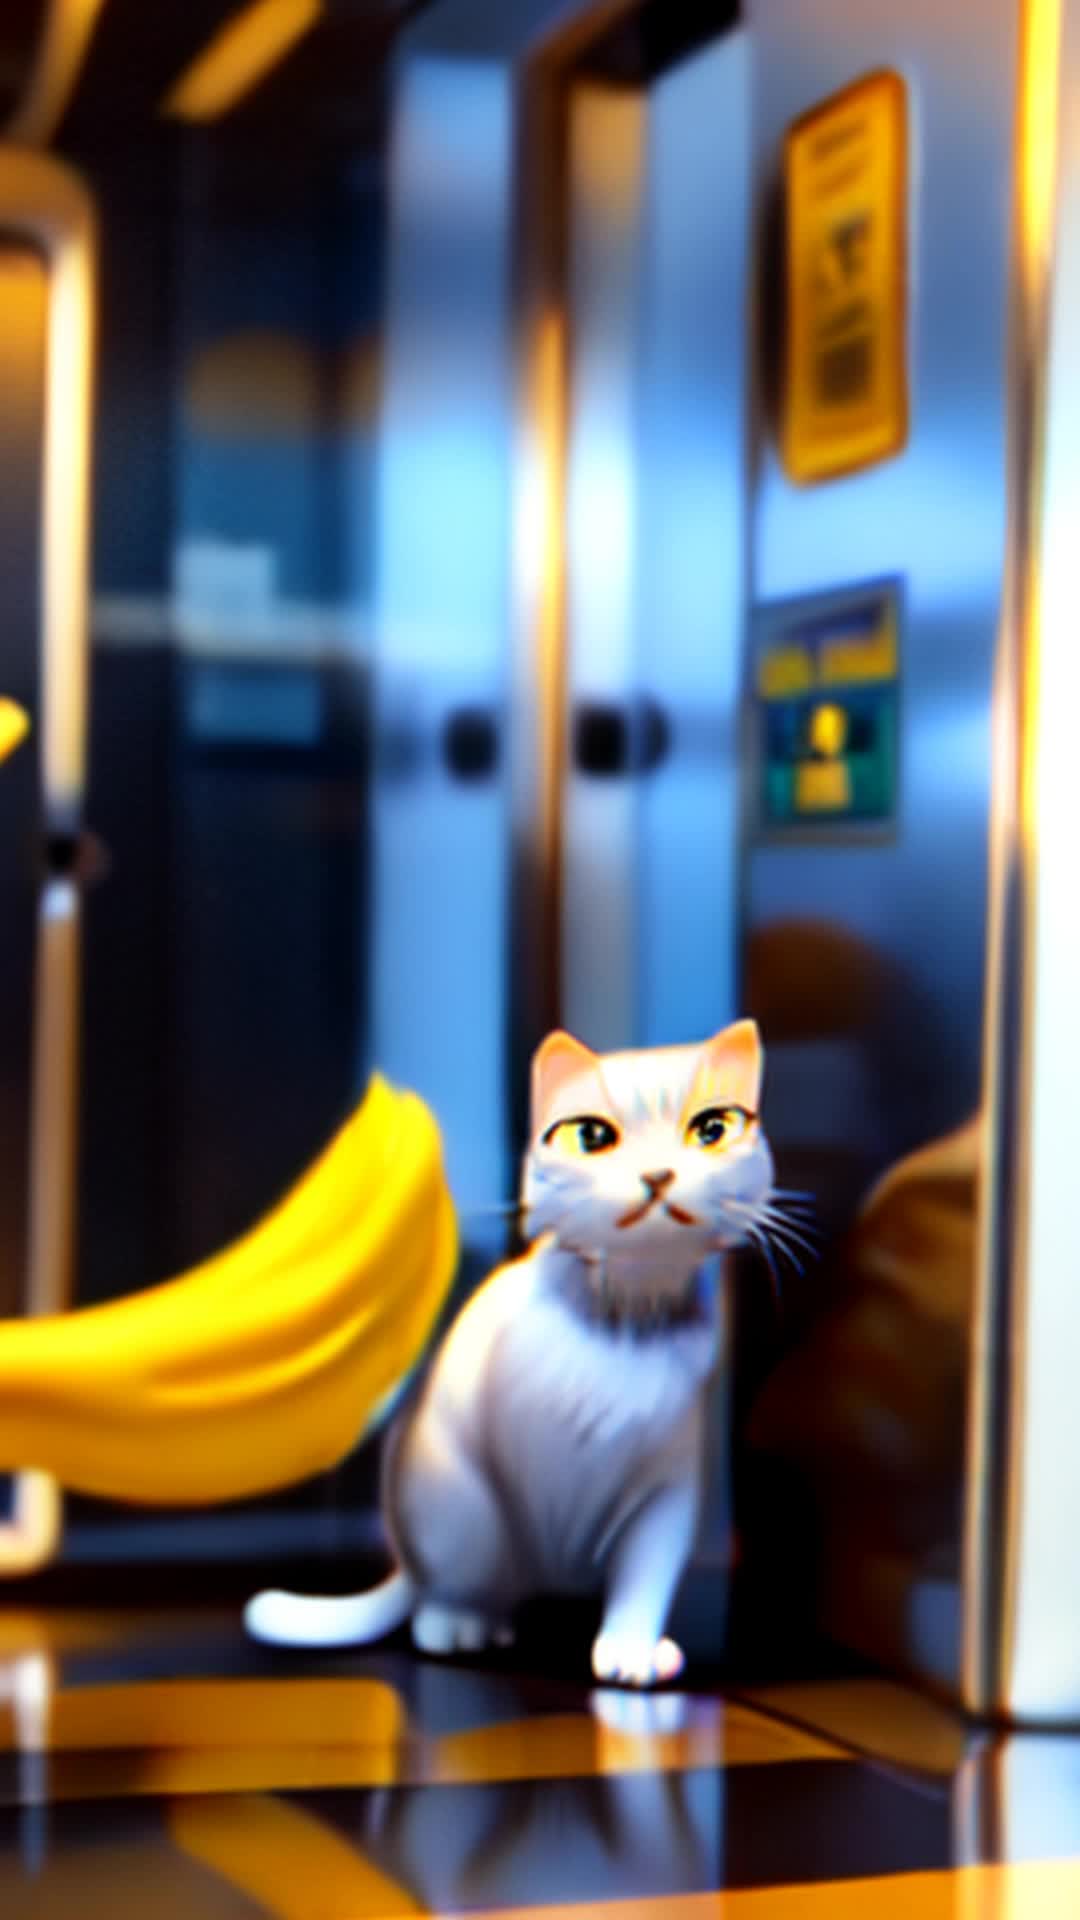 cat clad in sharp suit, swiping access card, entering elevator, tail flicking, anticipation, reflective metal surfaces of elevator, soft shadows, close-up shot